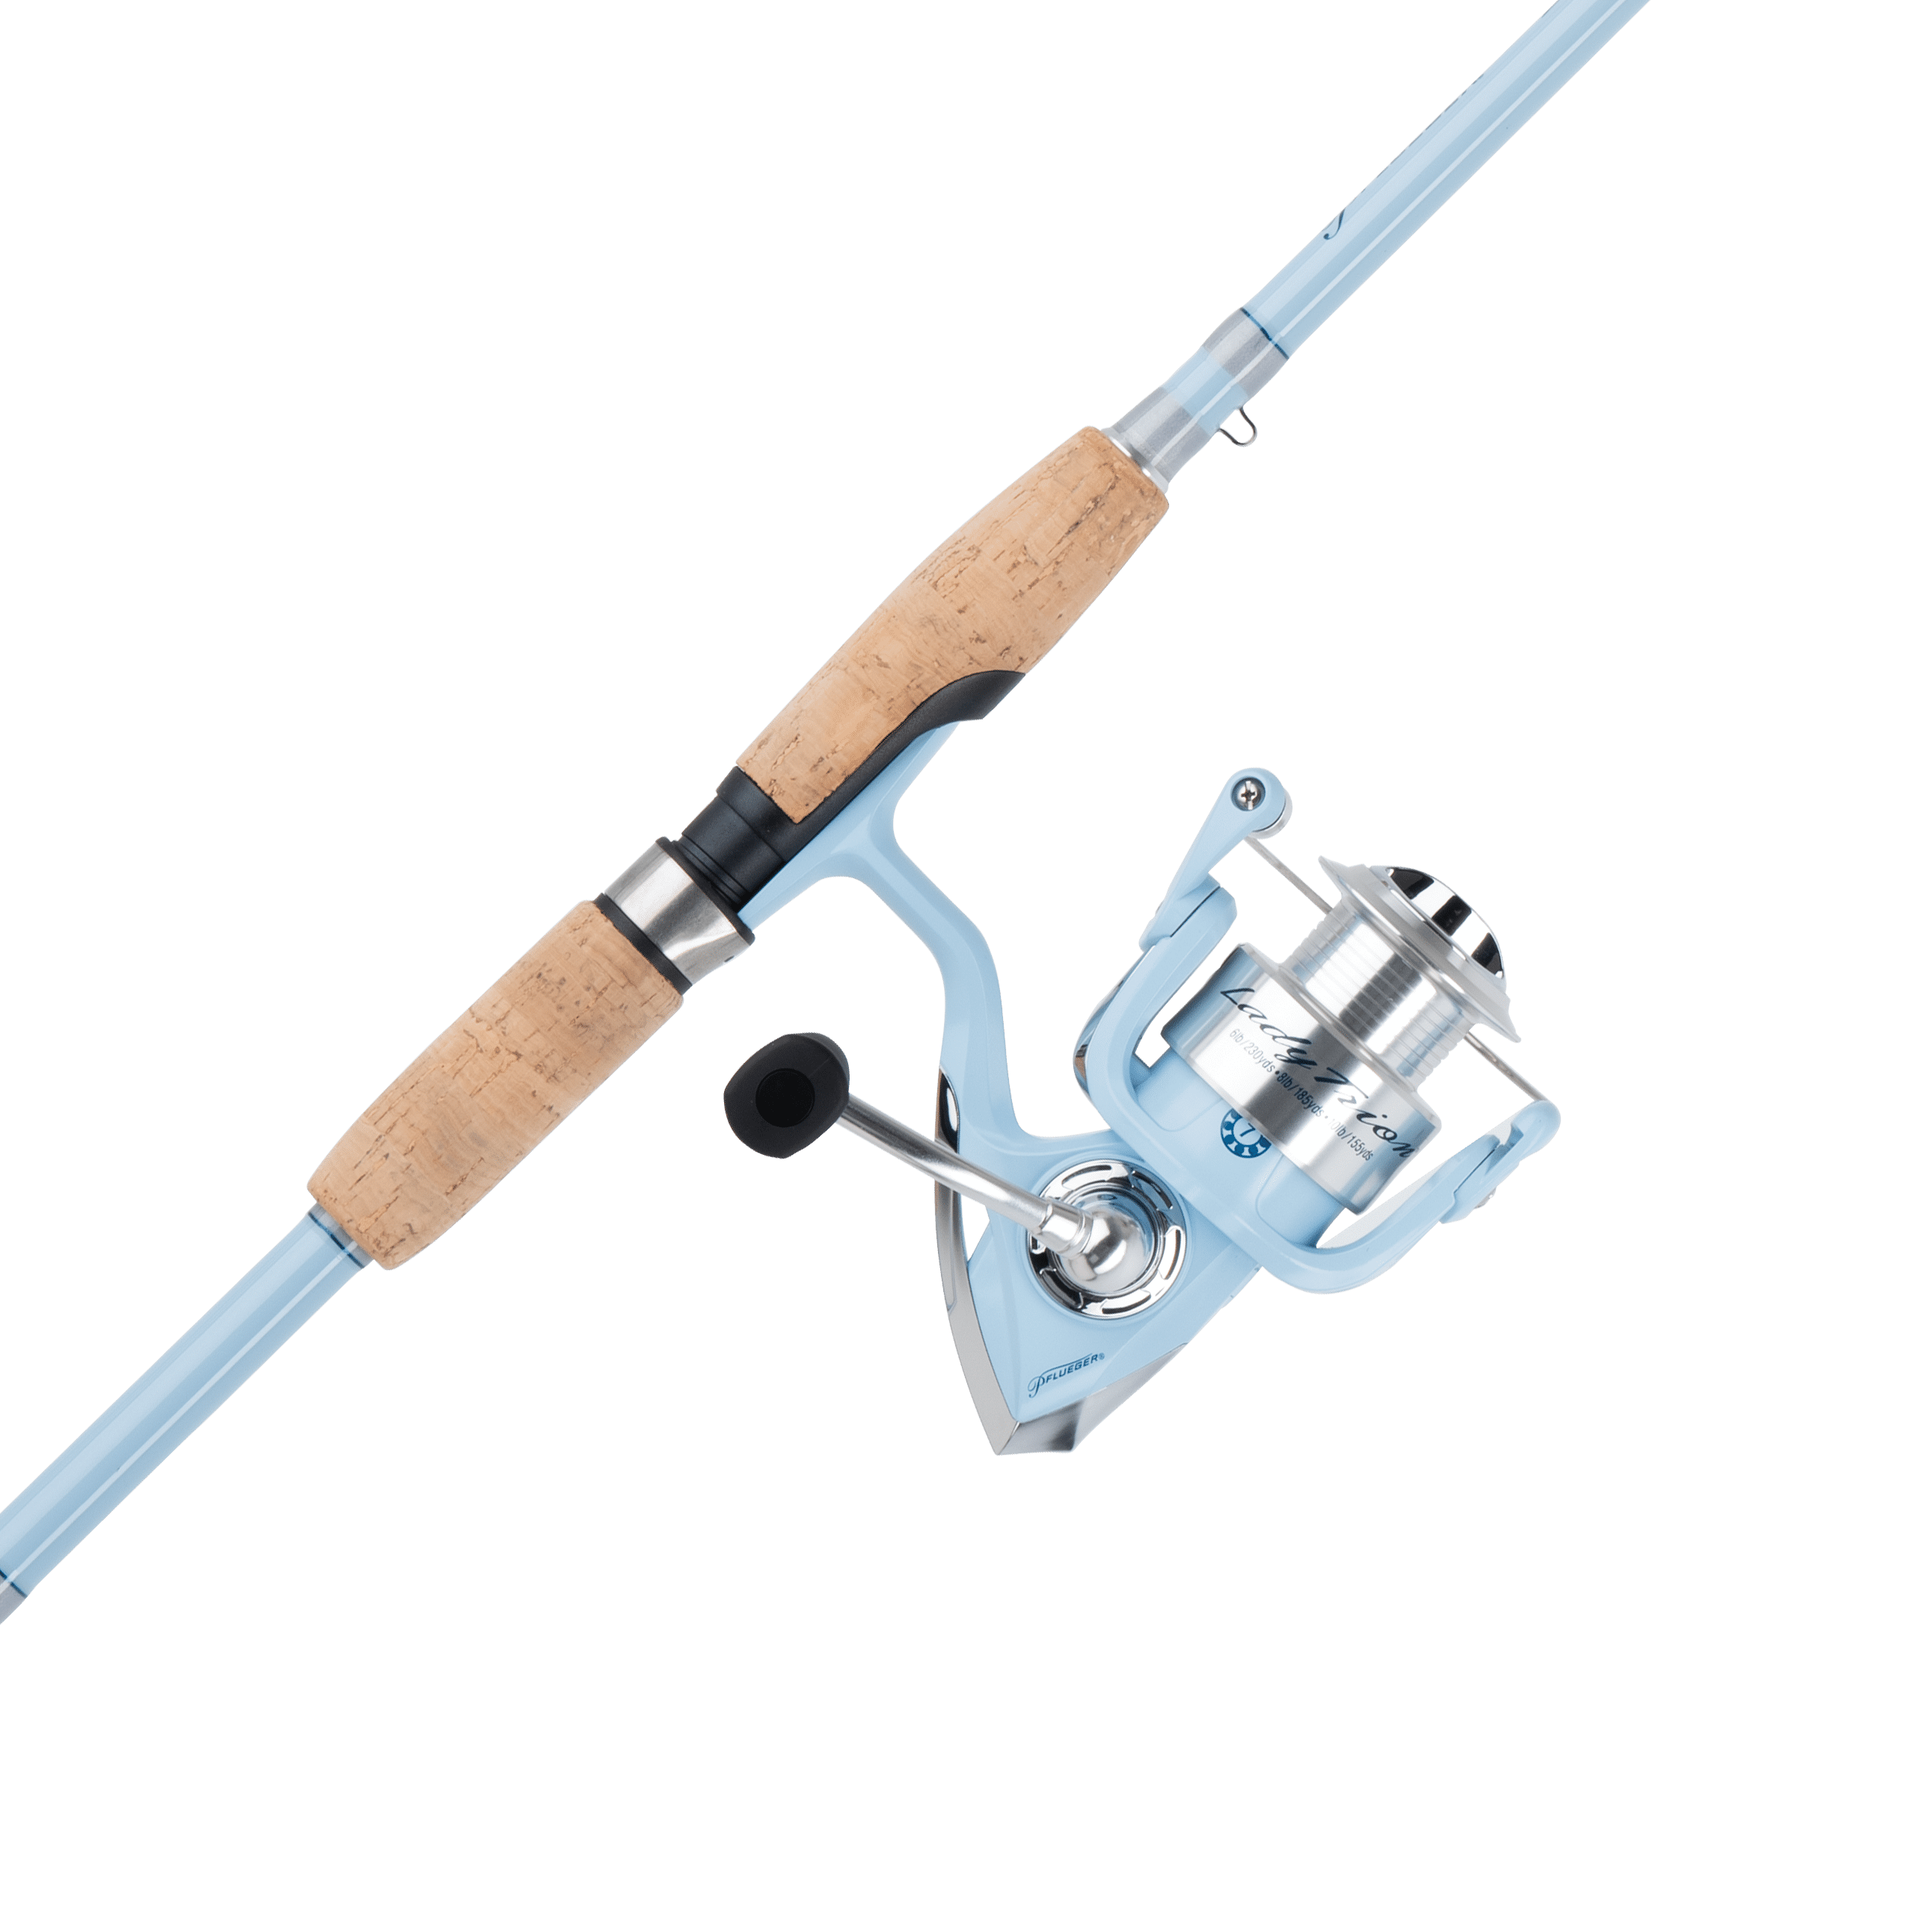 Eccomum Fishing Set 1.8m Retractable Rod, Spinning Reel, and Accessories -  Perfect Gift for Beginners and Pros 